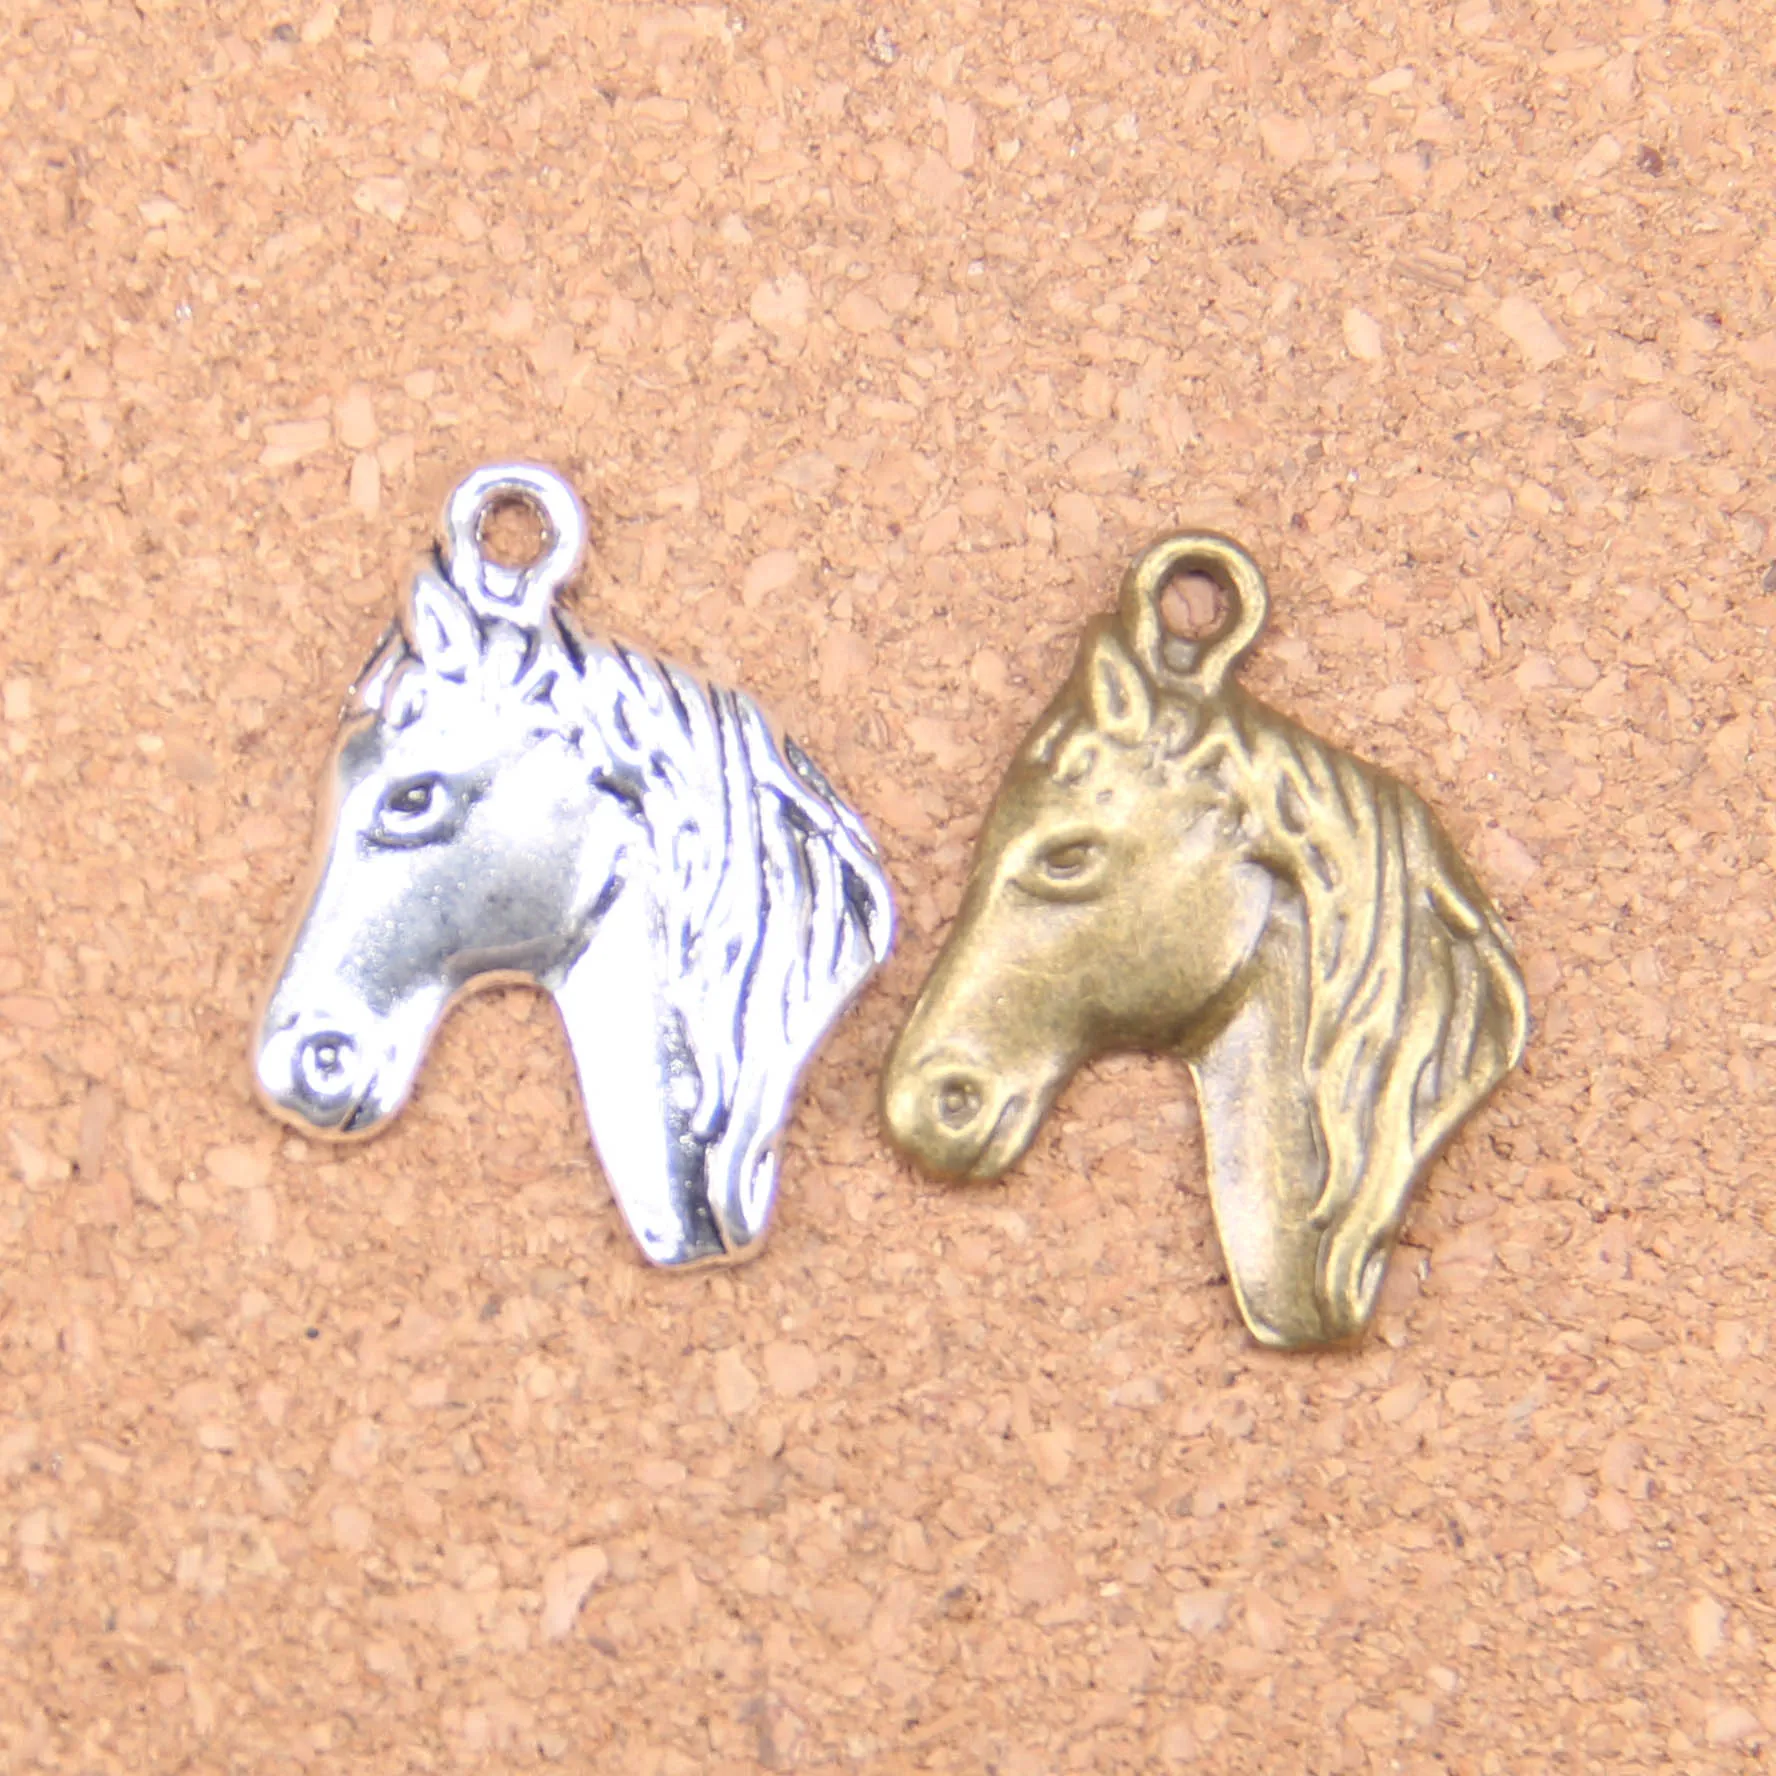 57st Antik Silver Bronze Plated Steed Horse Head Charms Pendant DIY Halsband Armband Bangle Fynd 28 * 22mm